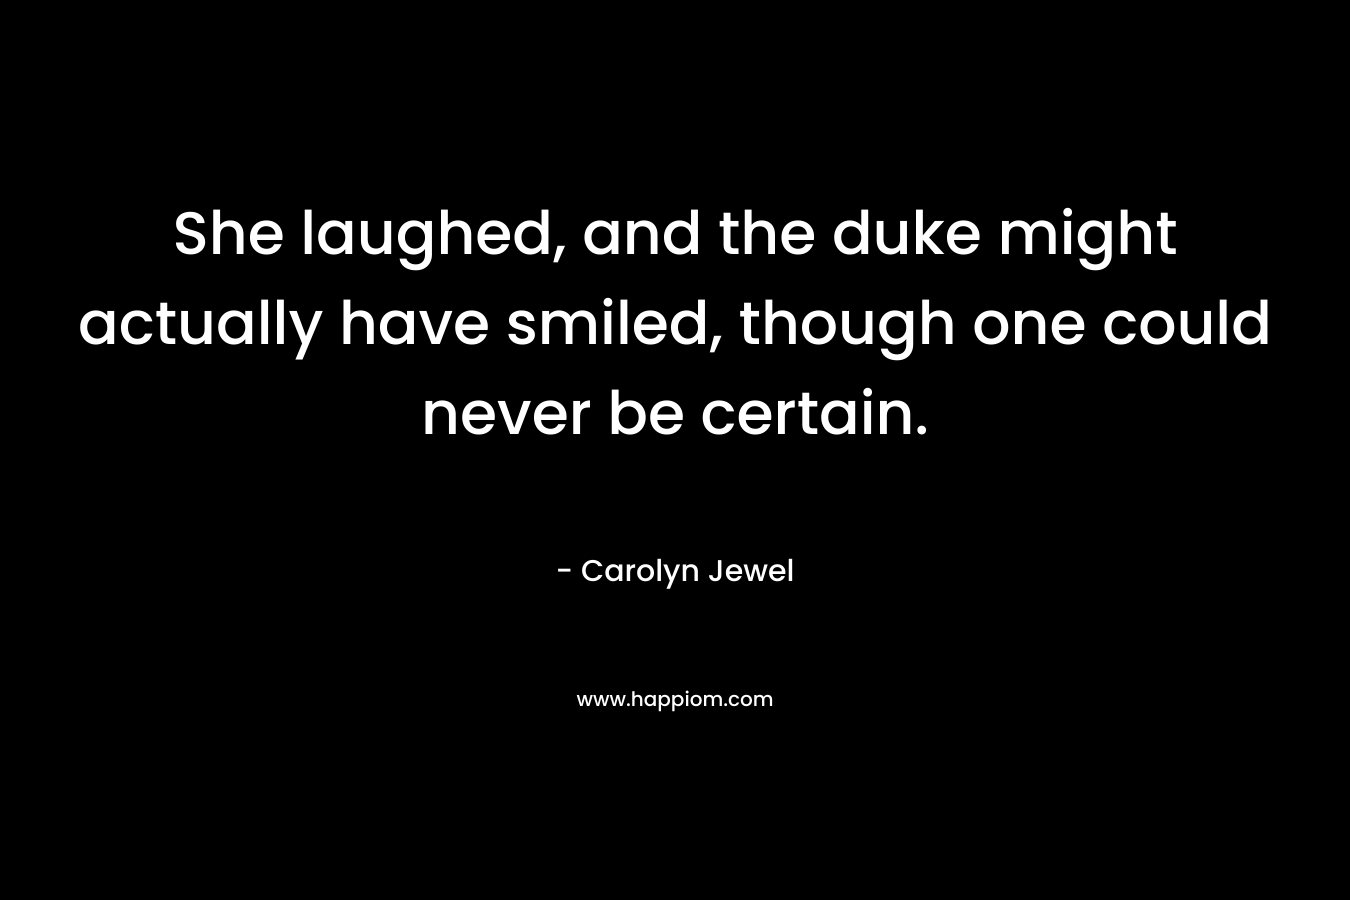 She laughed, and the duke might actually have smiled, though one could never be certain.